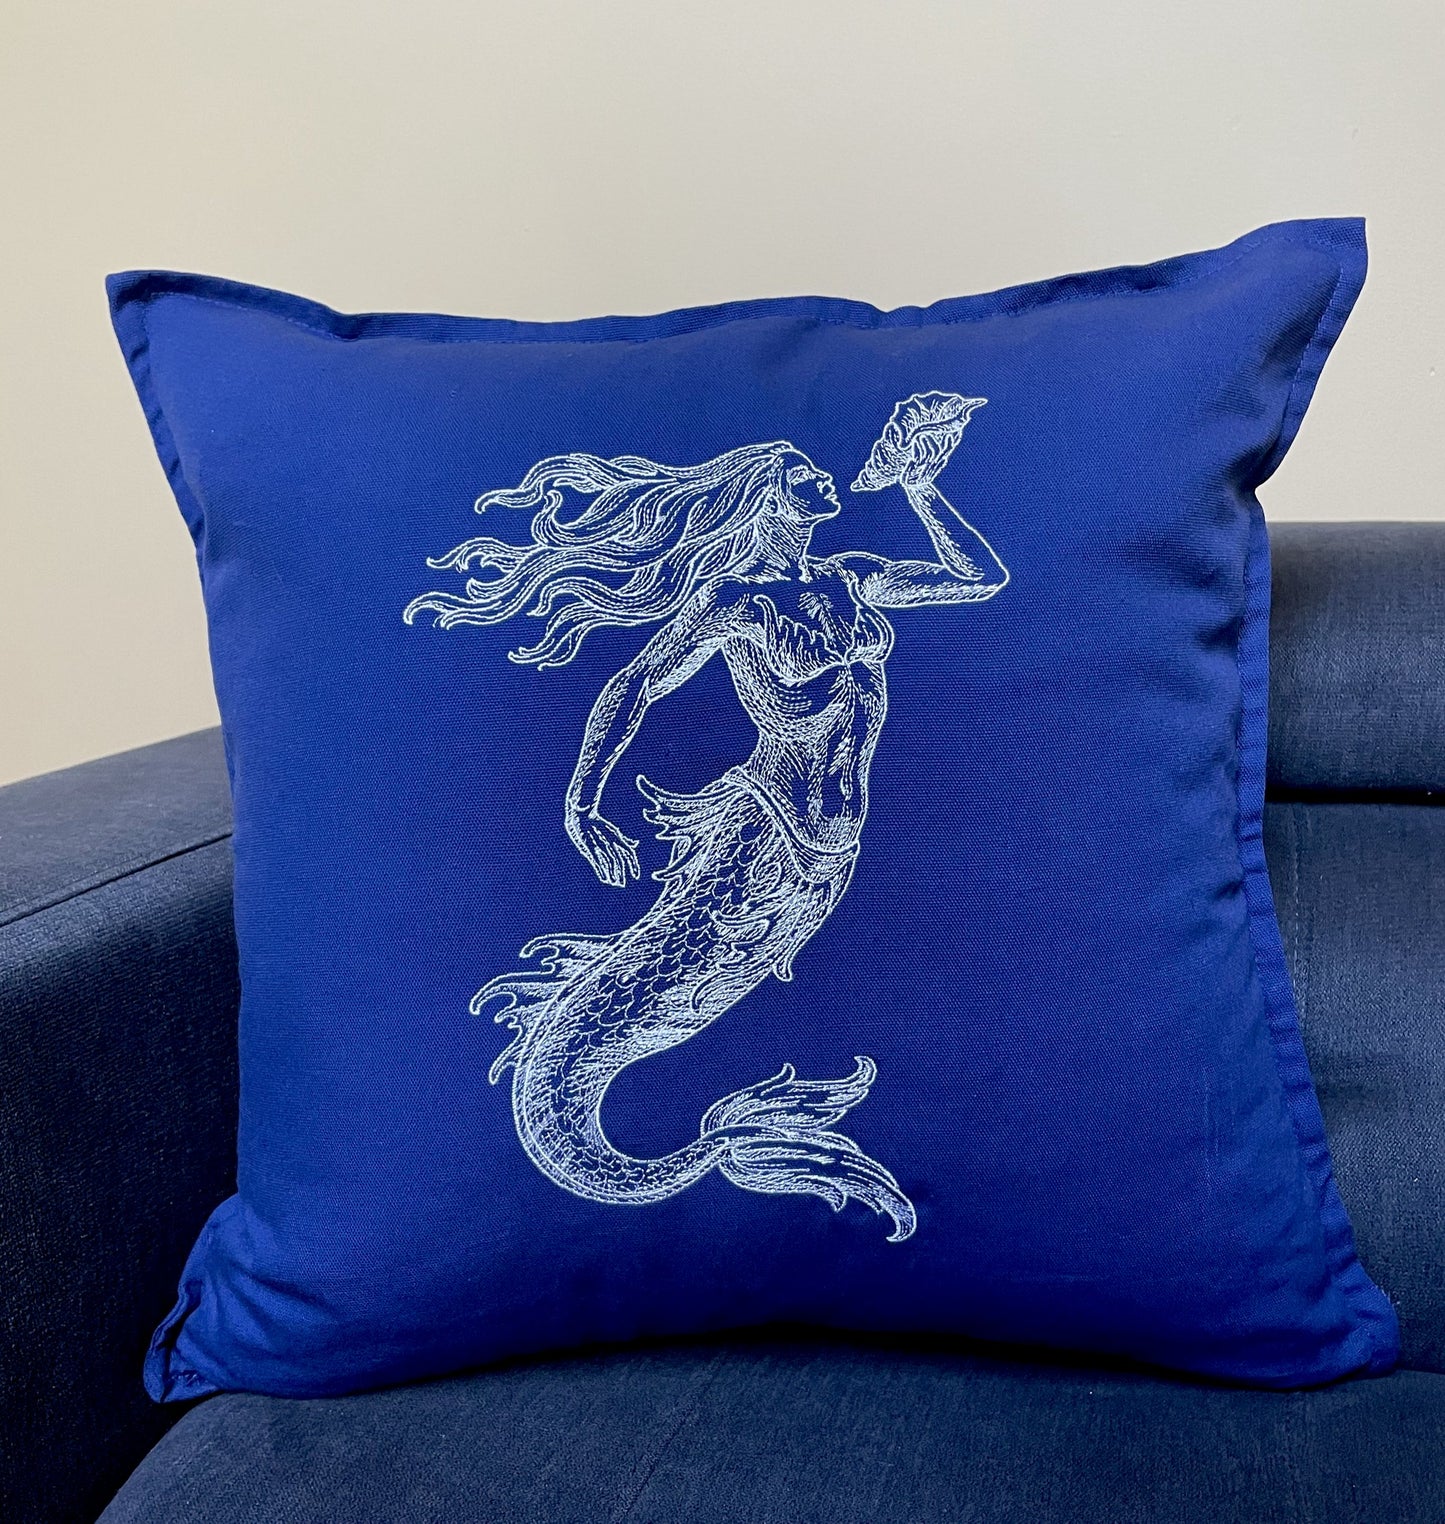 Mermaid with Shell Throw Pillow Cover 20” x 20” Cotton Decorative Pillow Cover